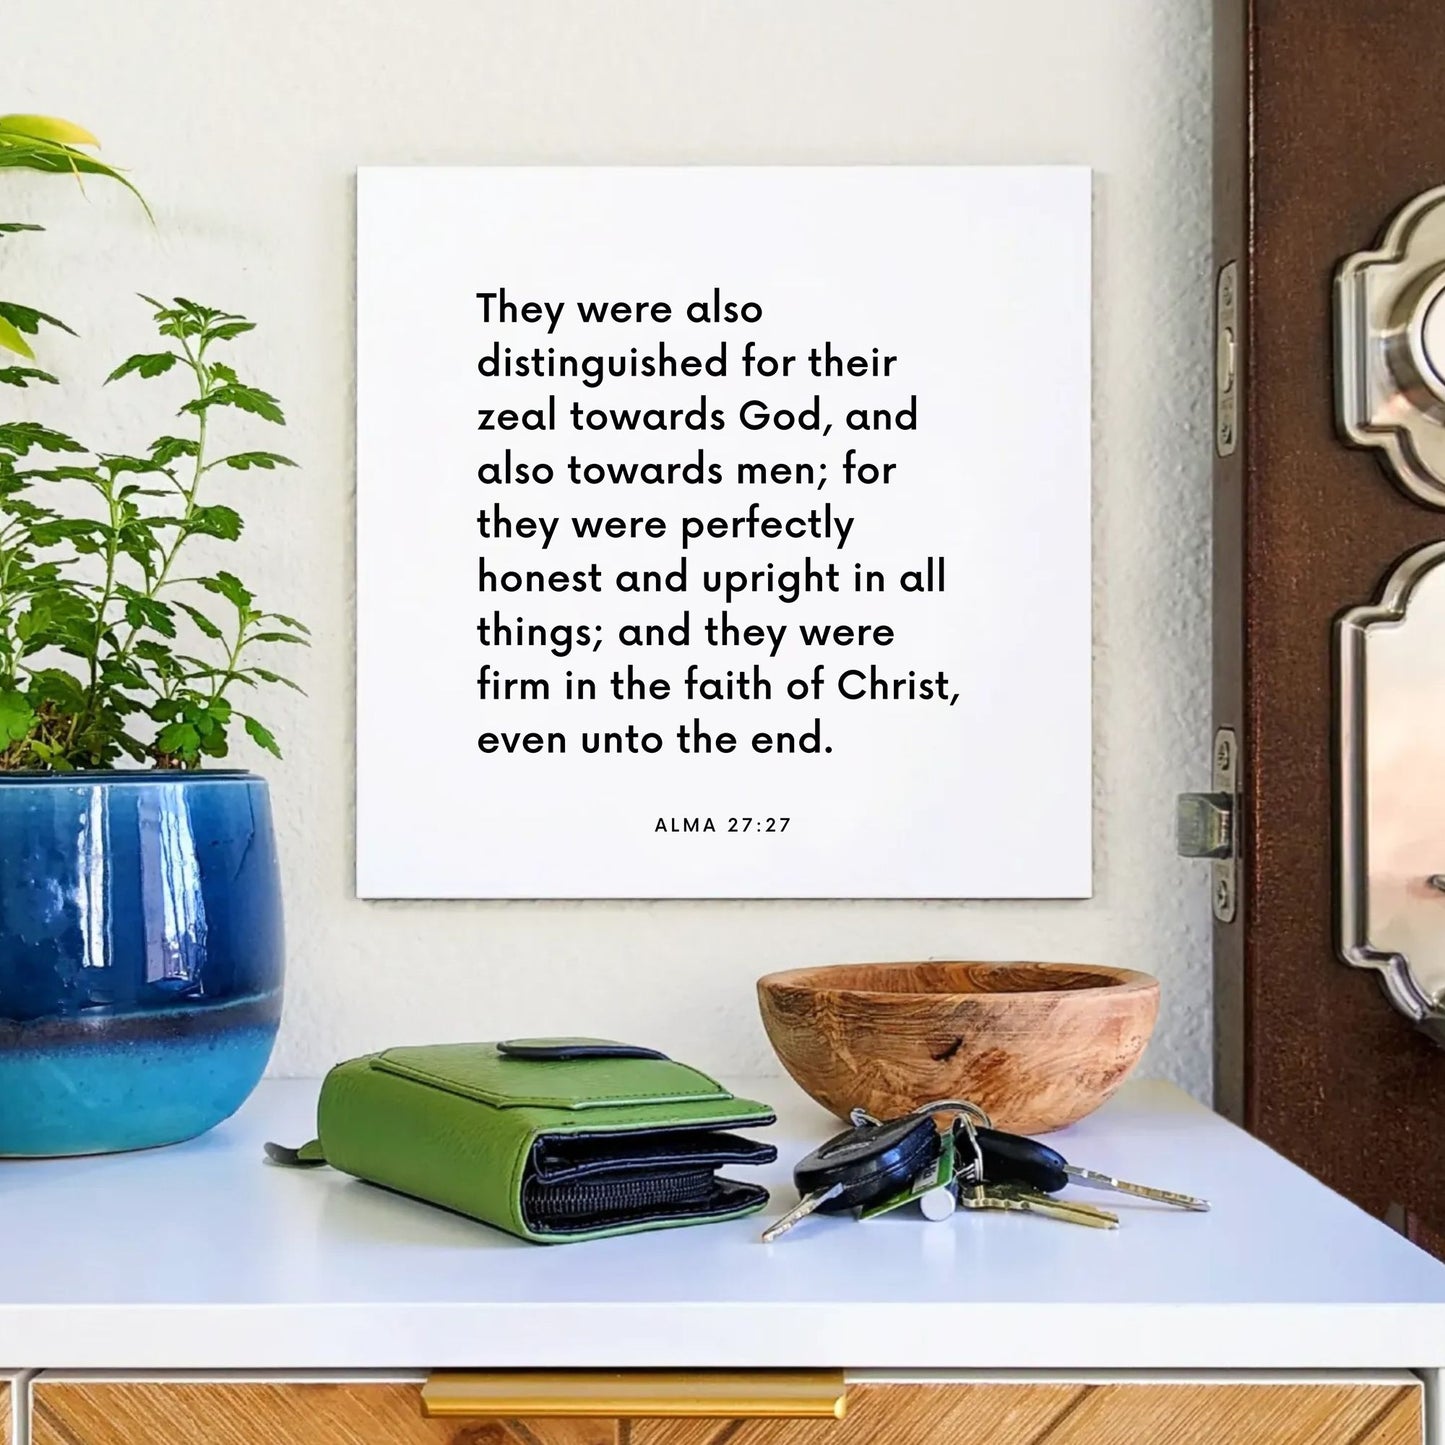 Entryway mouting of the scripture tile for Alma 27:27 - "They were perfectly honest and upright in all things"